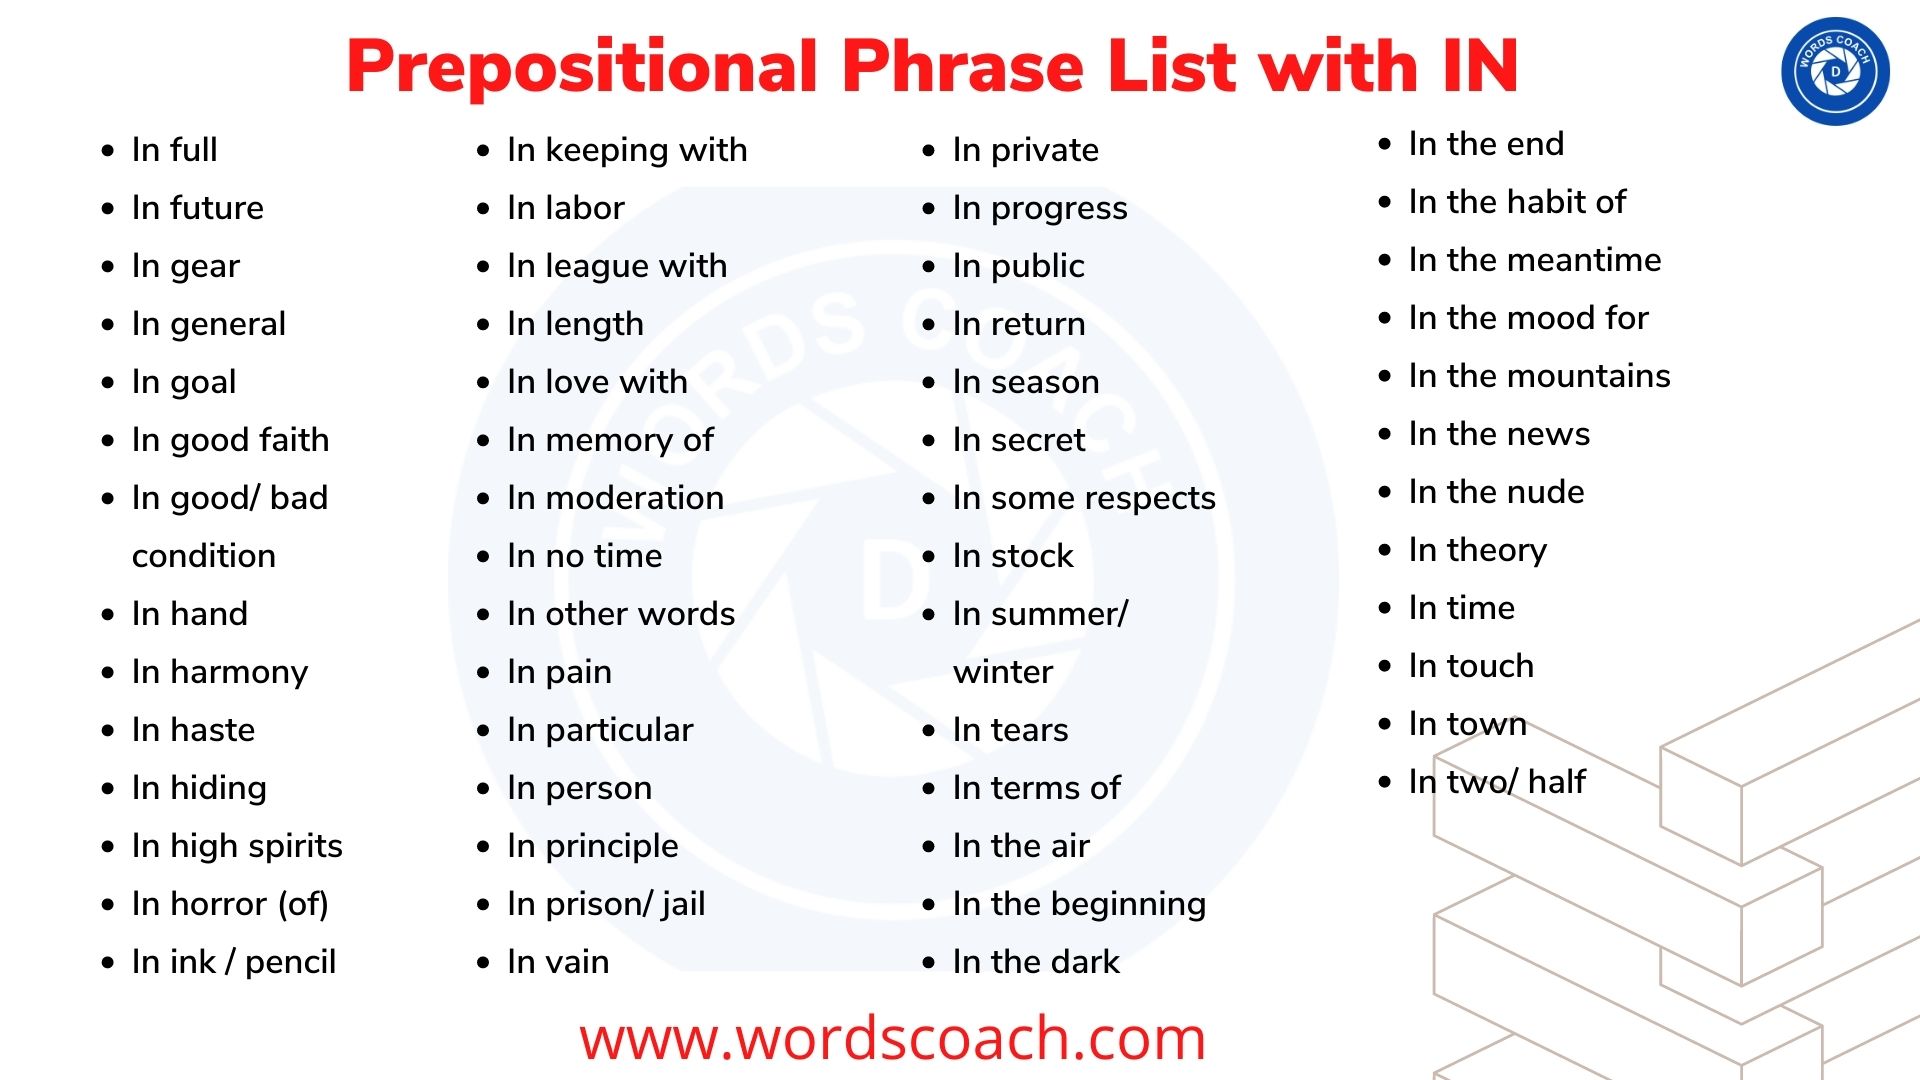 Prepositional Phrase List with IN - wordscoach.com